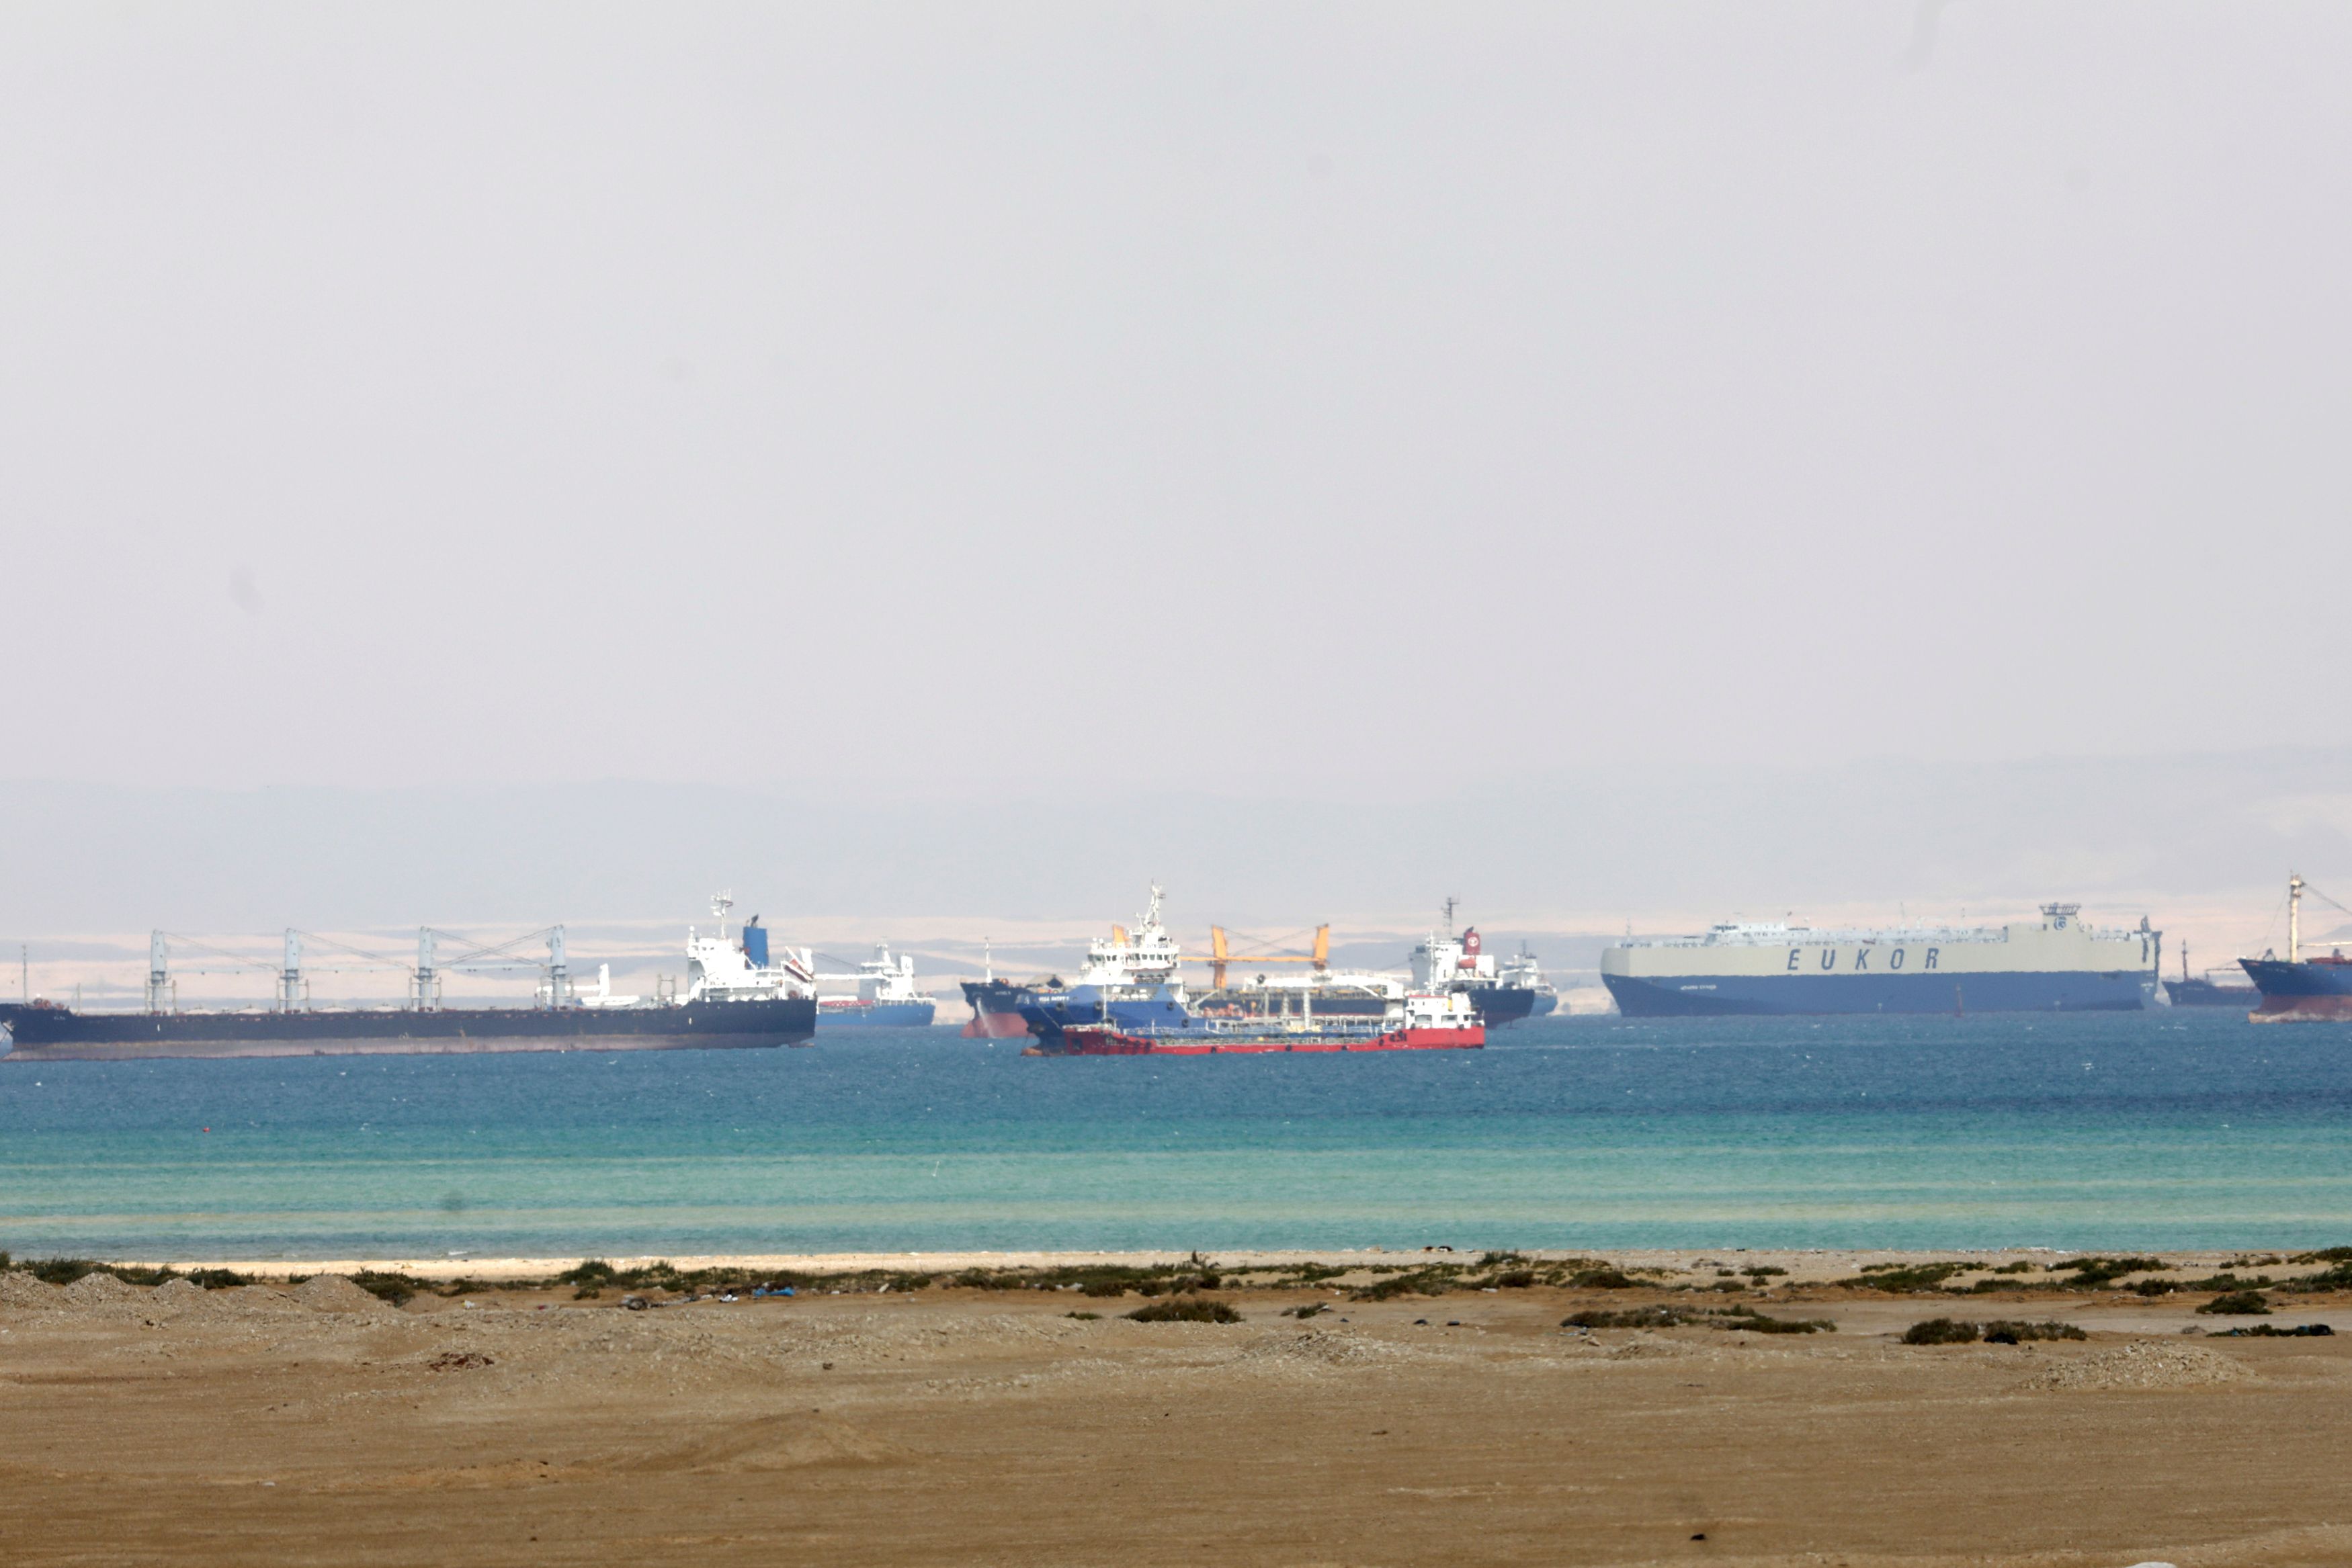 FILE PHOTO: Ships are seen at the entrance of the Suez Canal, Egypt March 26, 2021. REUTERS/Mohamed Abd El Ghany/File Photo